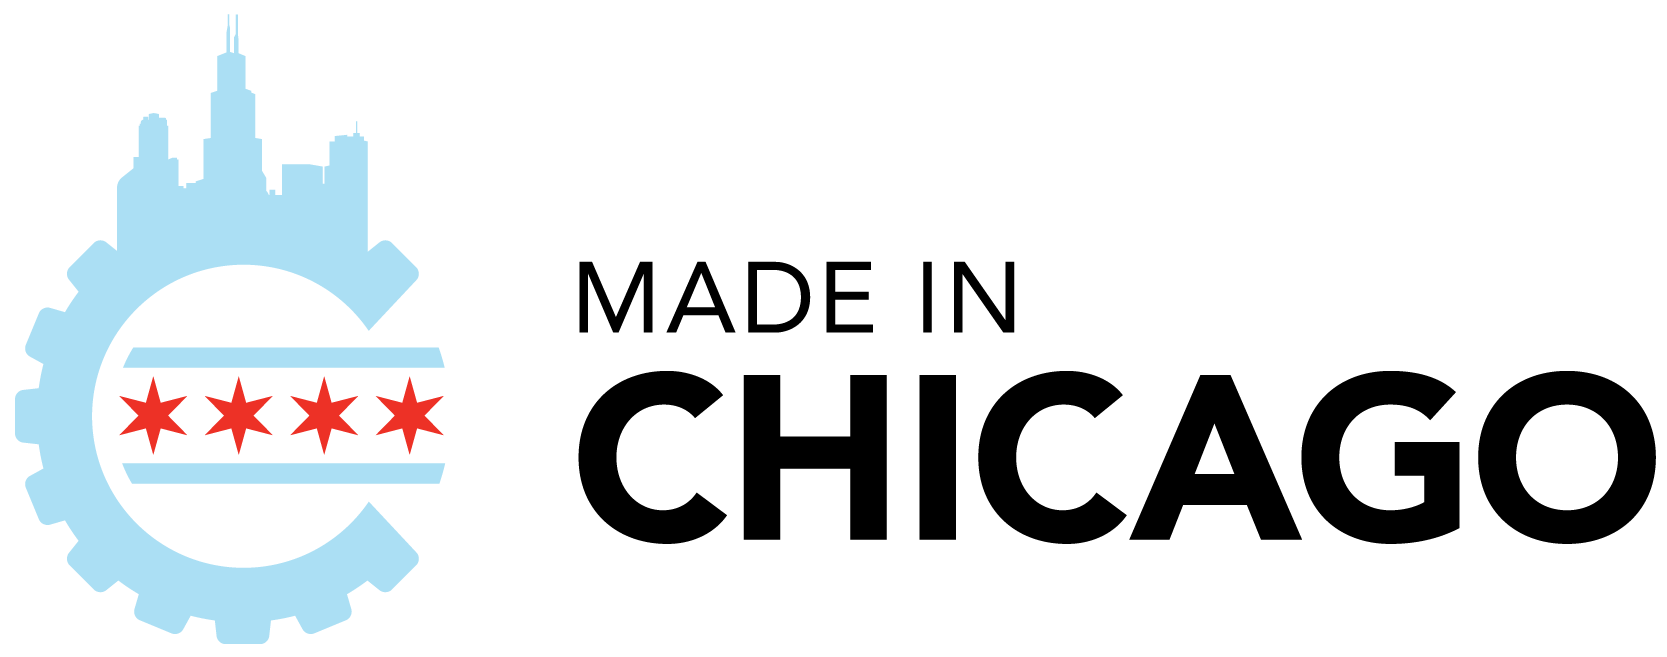 Chicago Logo - About Made in Chicago | Made in Chicago